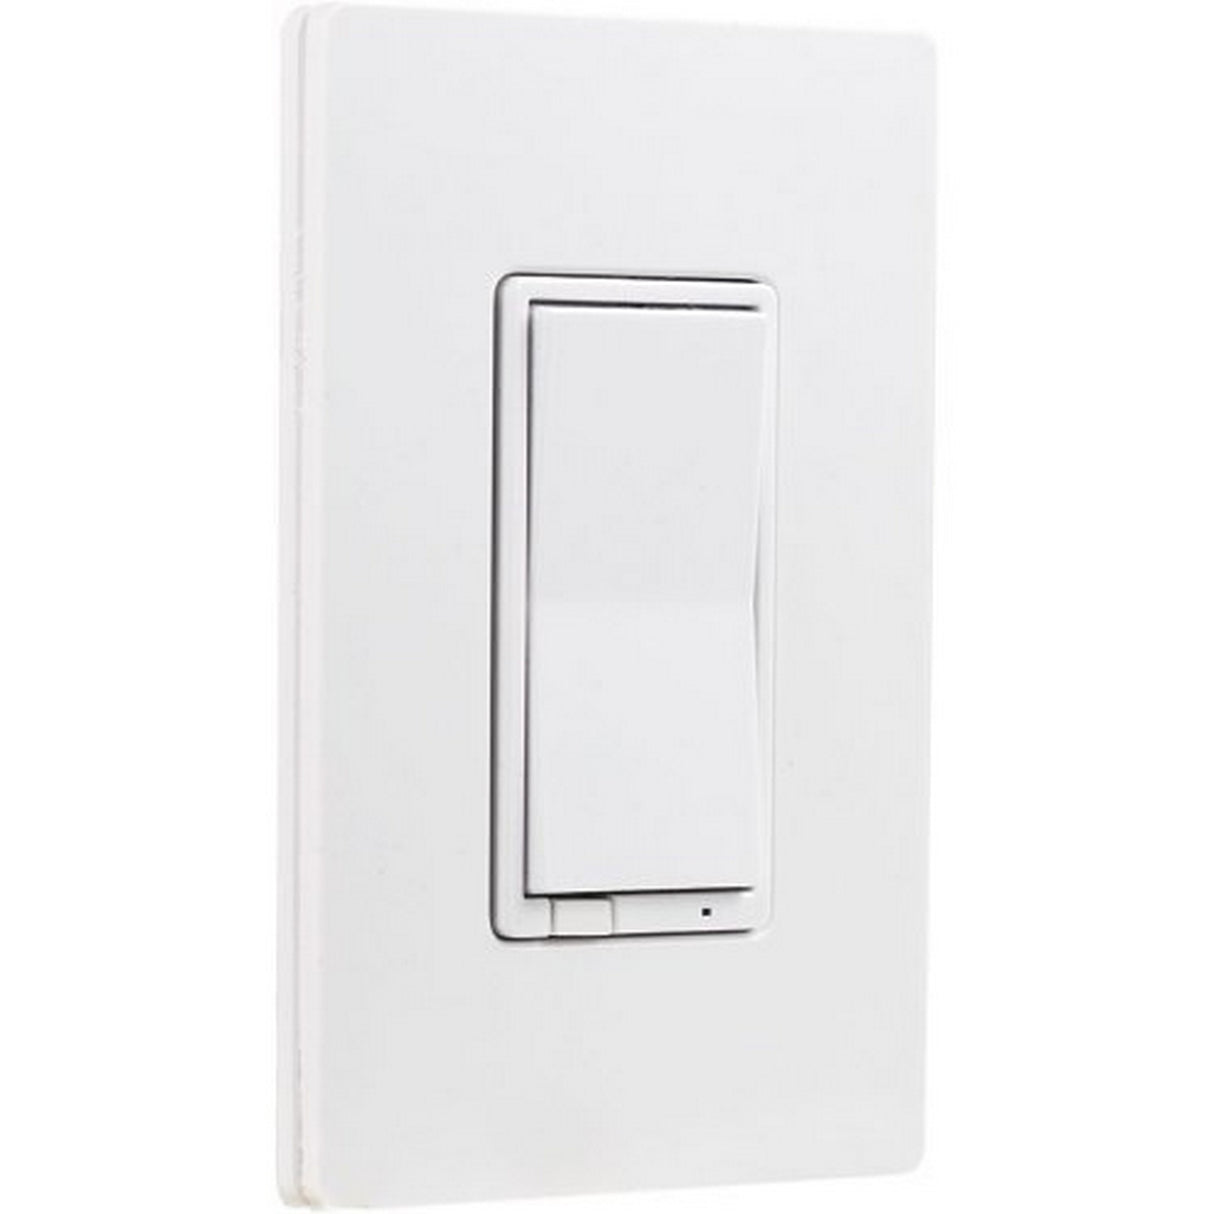 iDevices Z-Wave Enabled RF Decorator Dimmer 600W Incandescent, White